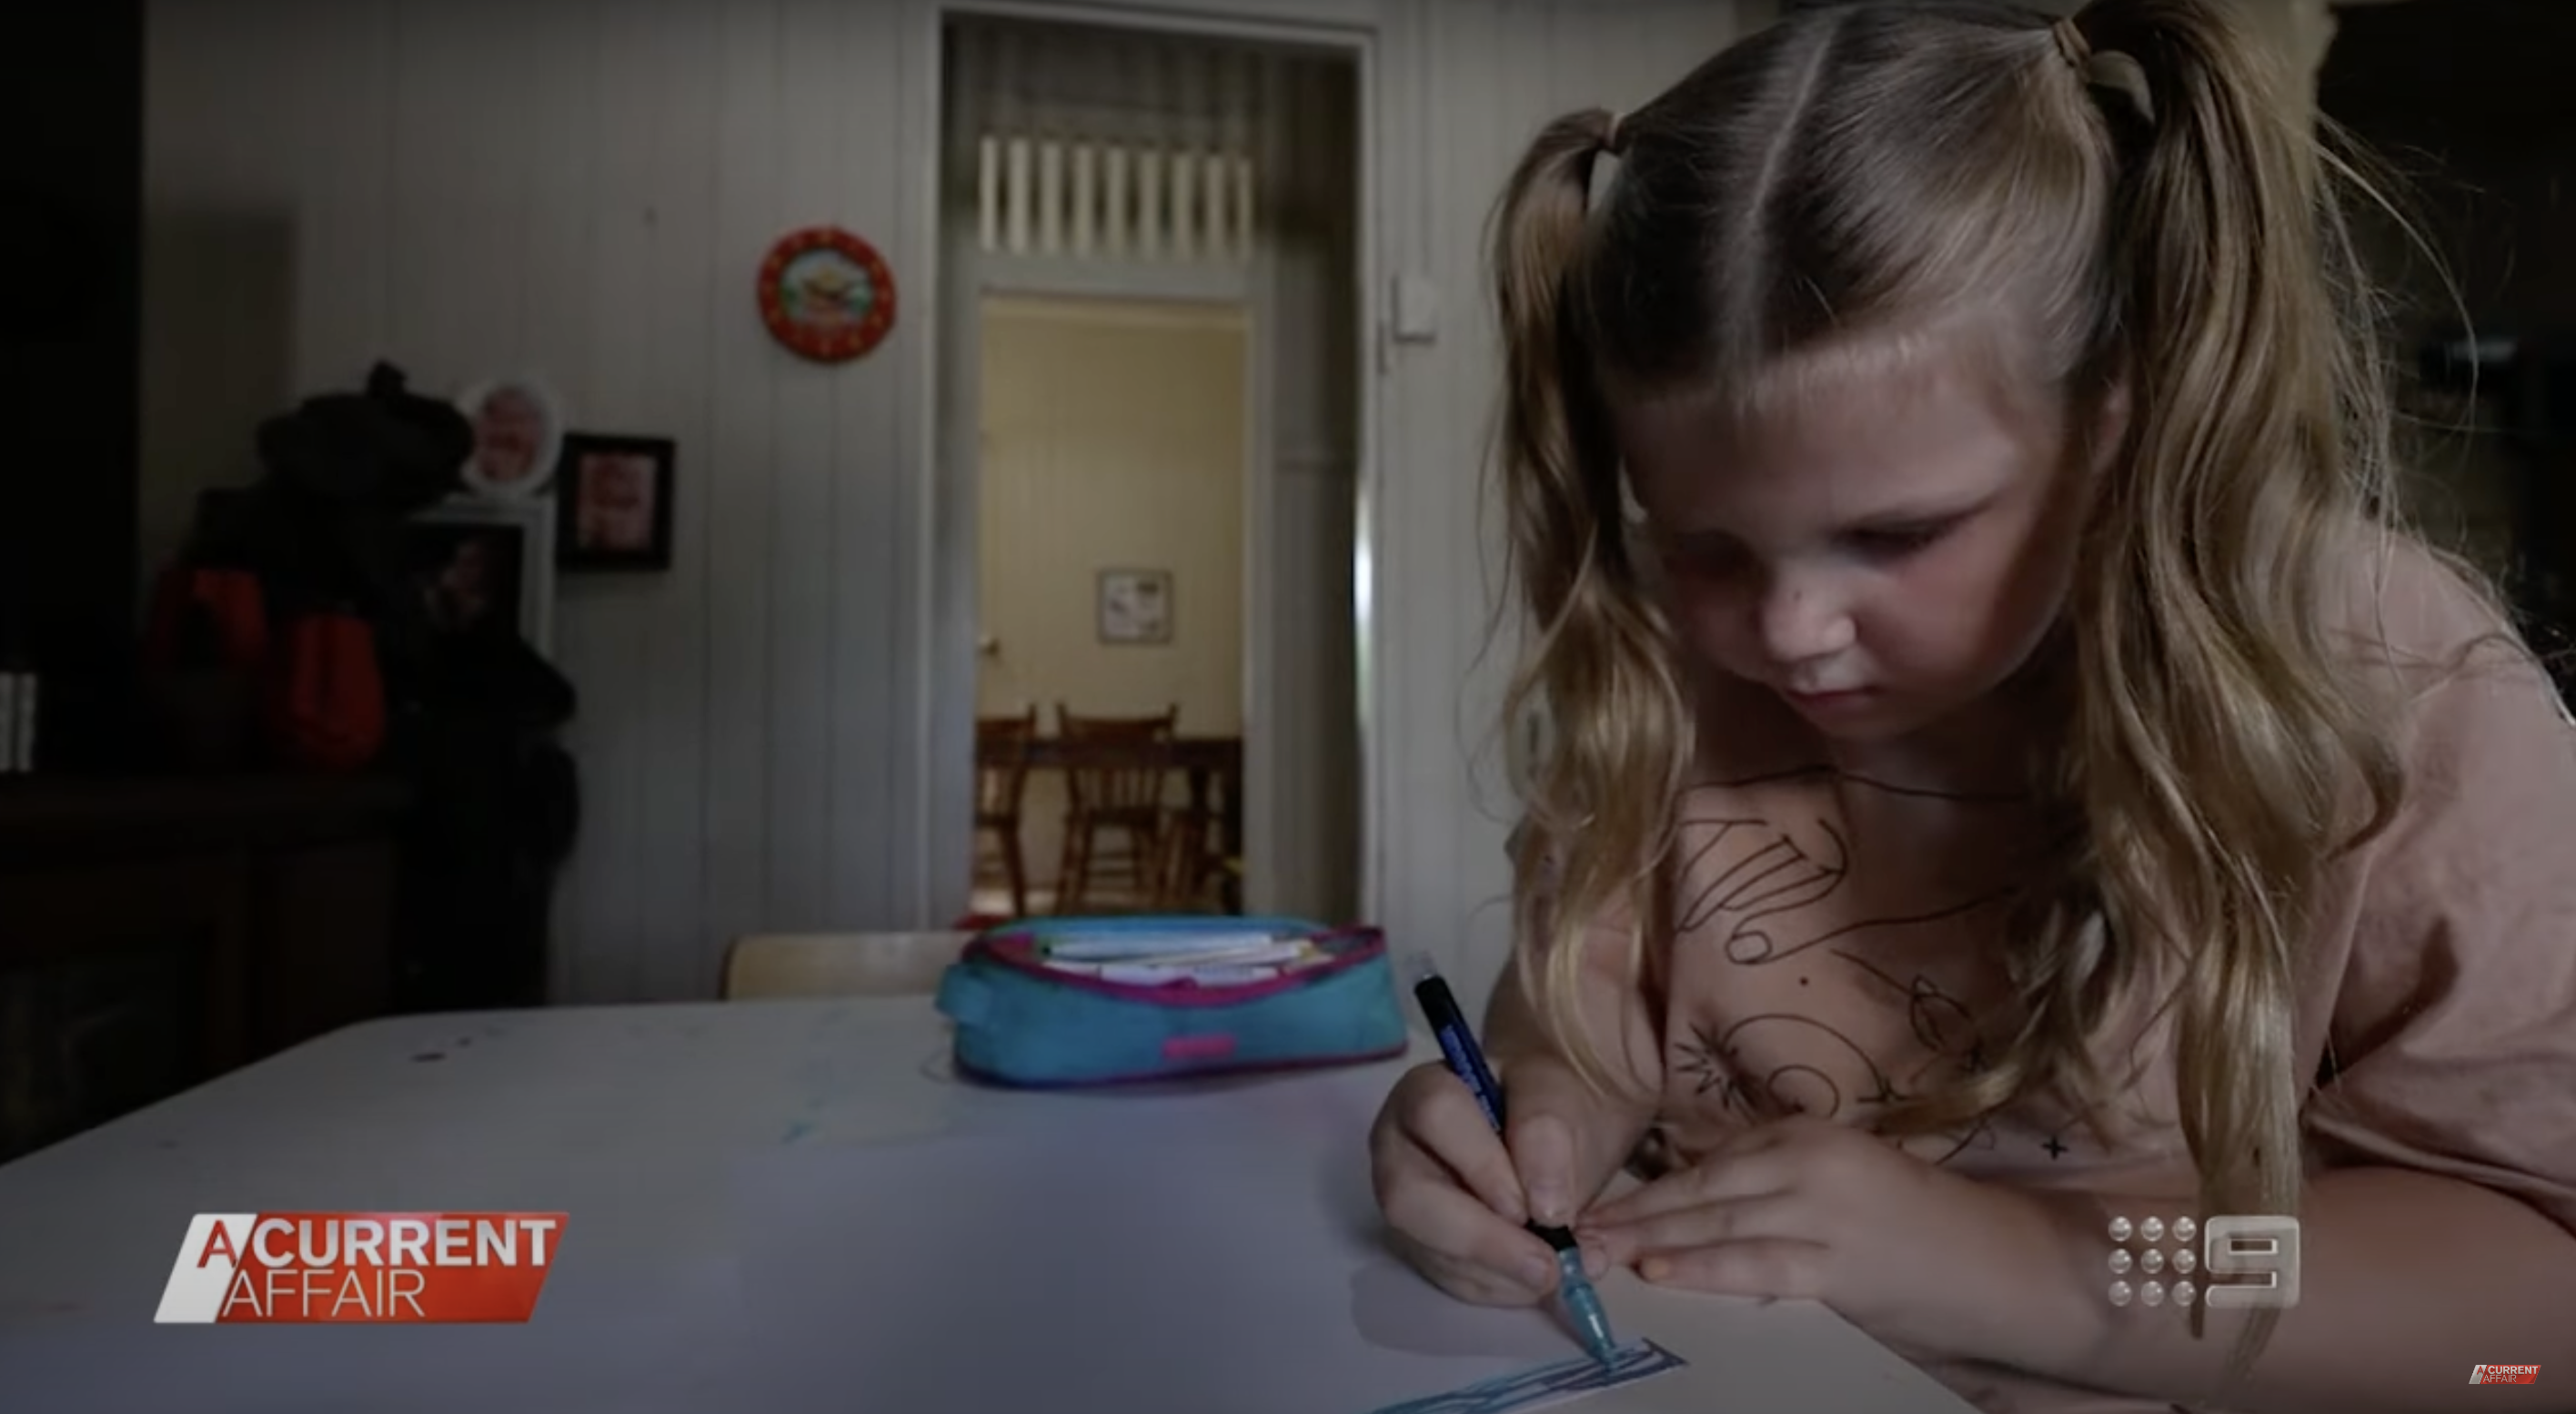 Little Eadie is making drawings on a piece of paper, as seen in a video dated December 5, 2023 | Source: youtube.com/ACurrentAffair9